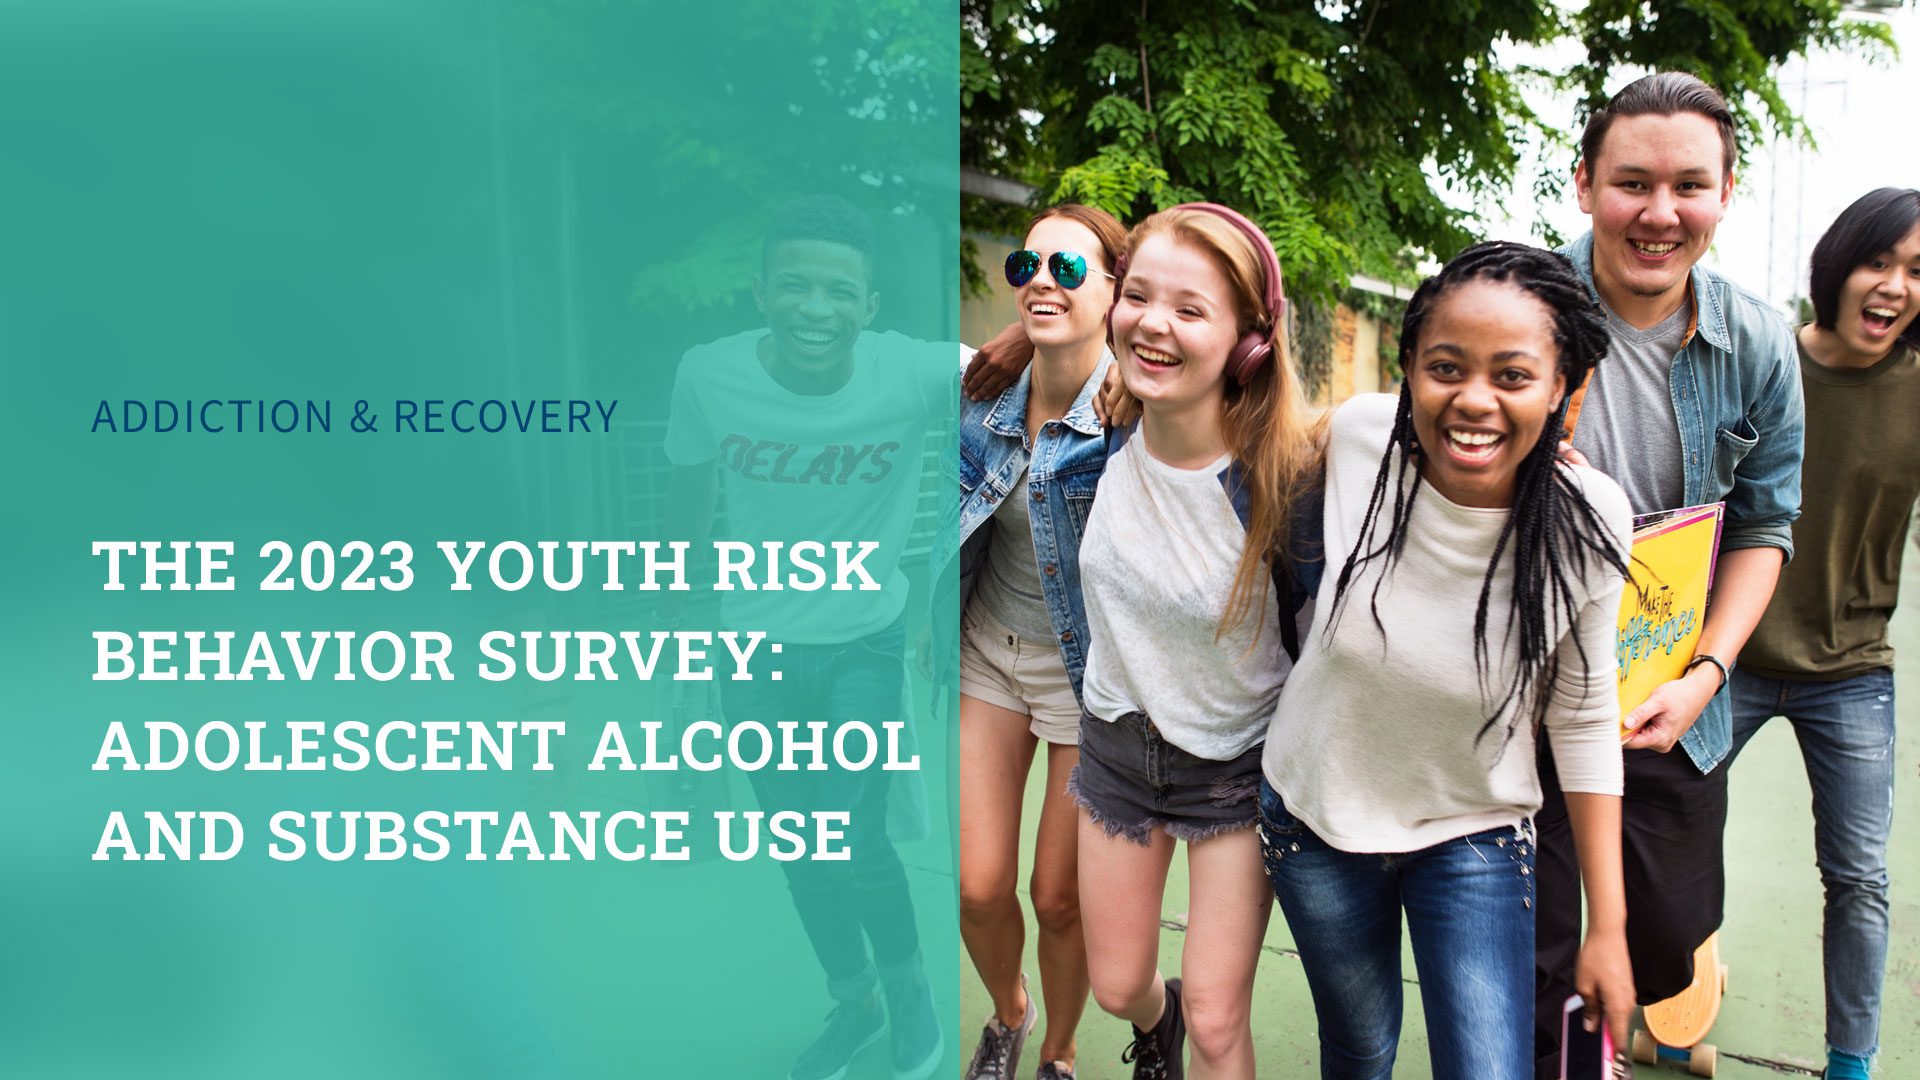 The 2023 Youth Risk Behavior Survey: Adolescent Alcohol and Substance Use 